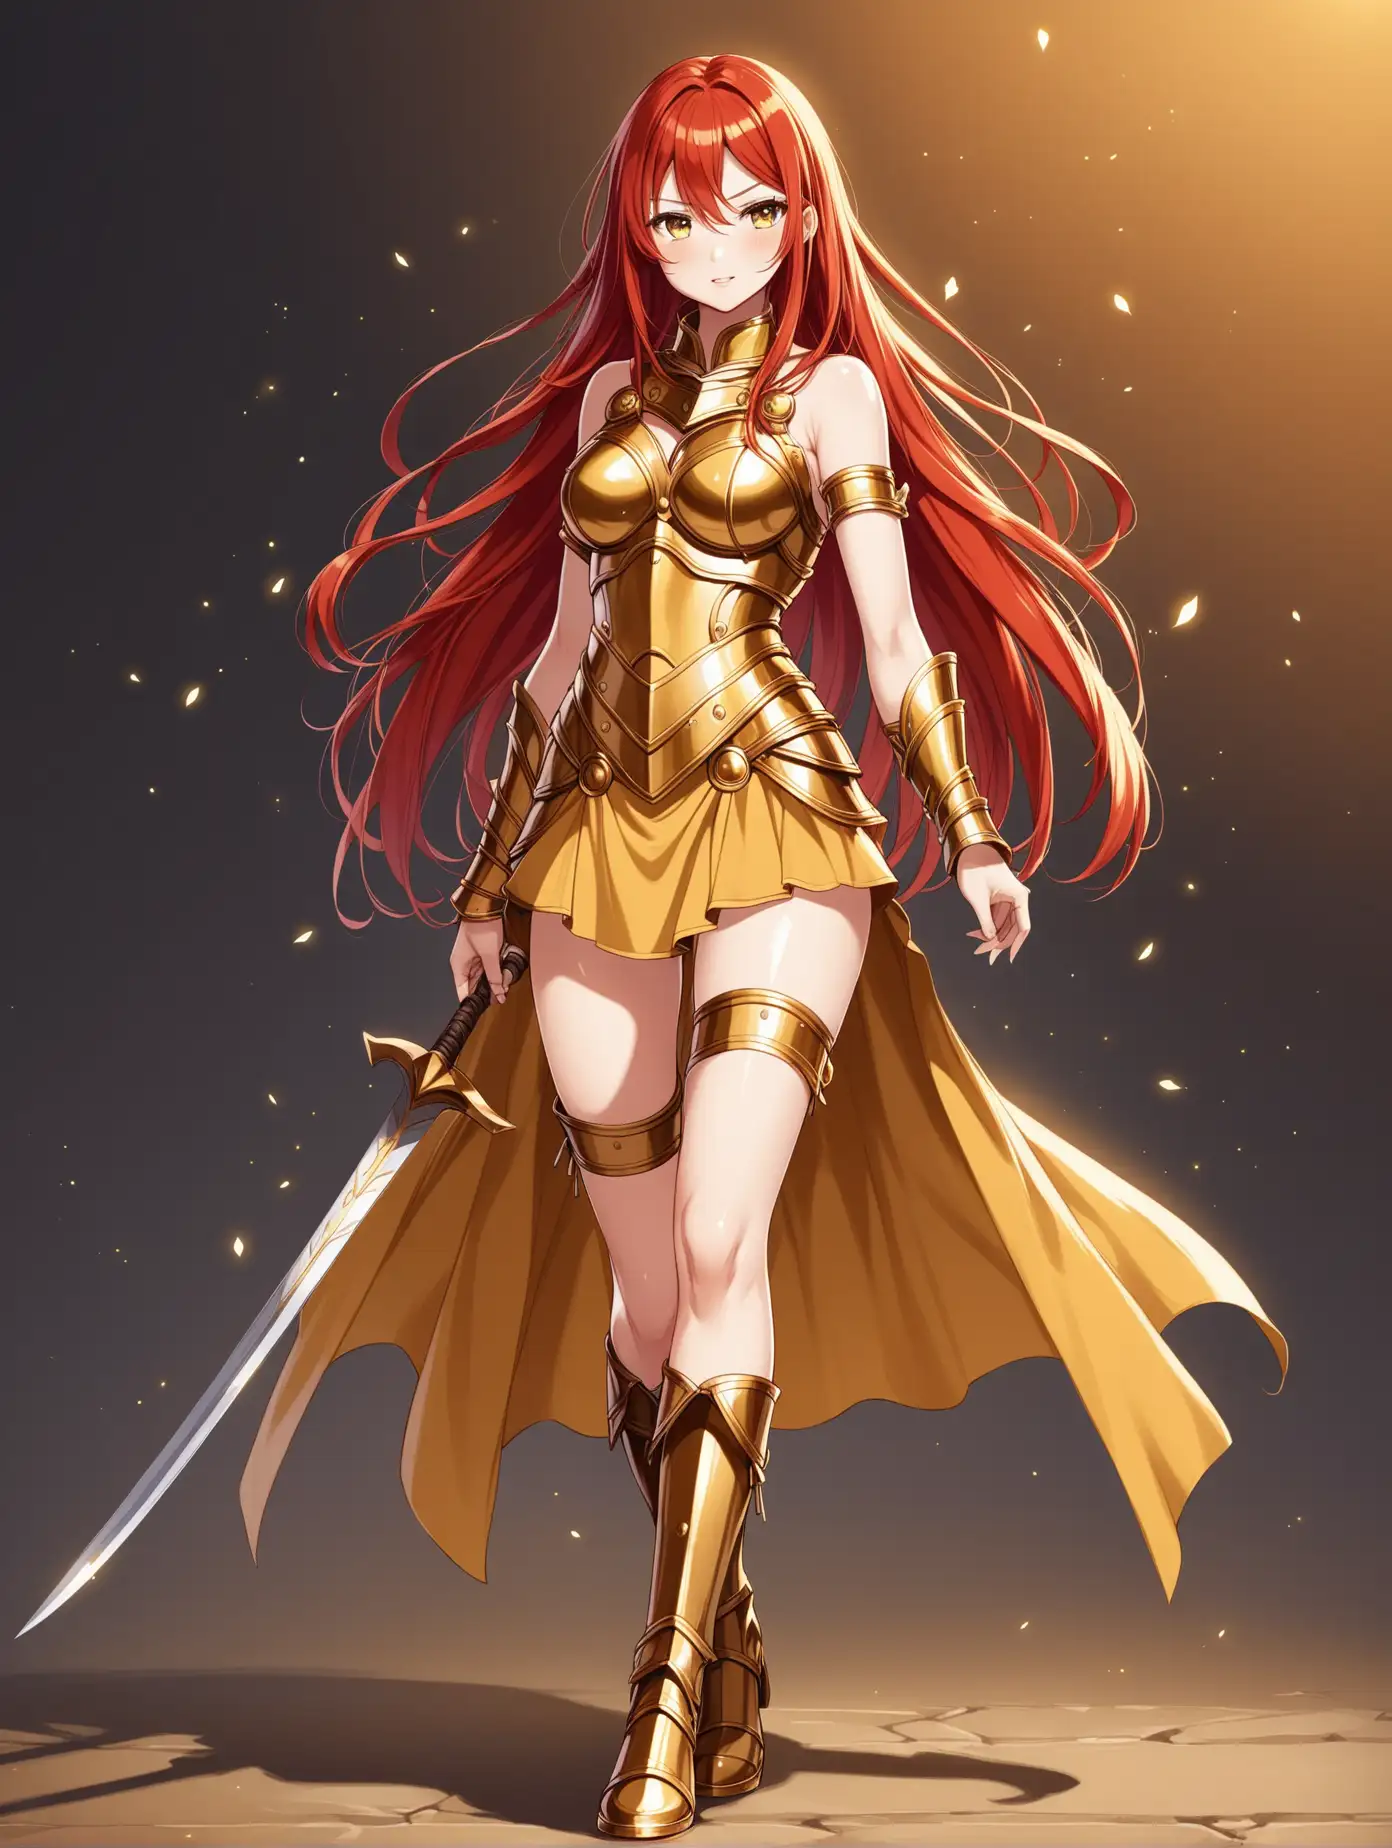 Full body image of a sensual redhead anime gladiator girl with golden outfit, not so long hair in length, wearing boots